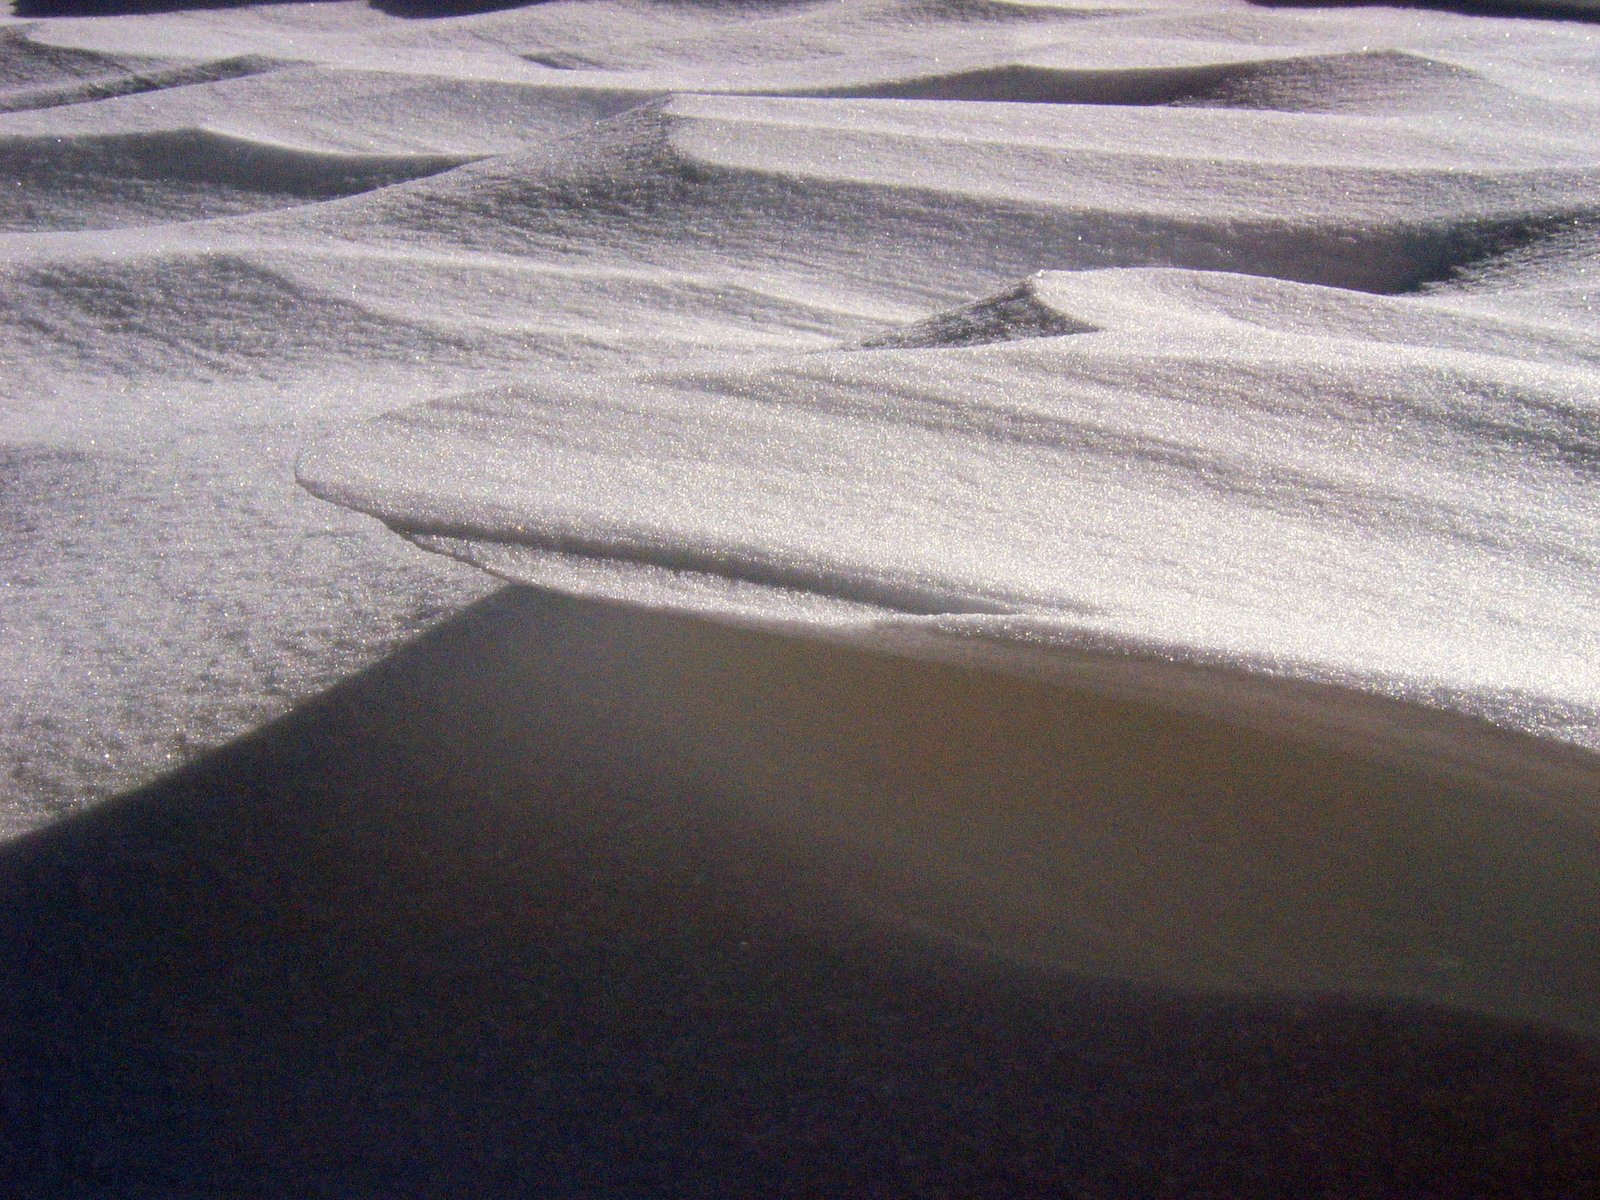 sand dunes that look like they are covered in the sand